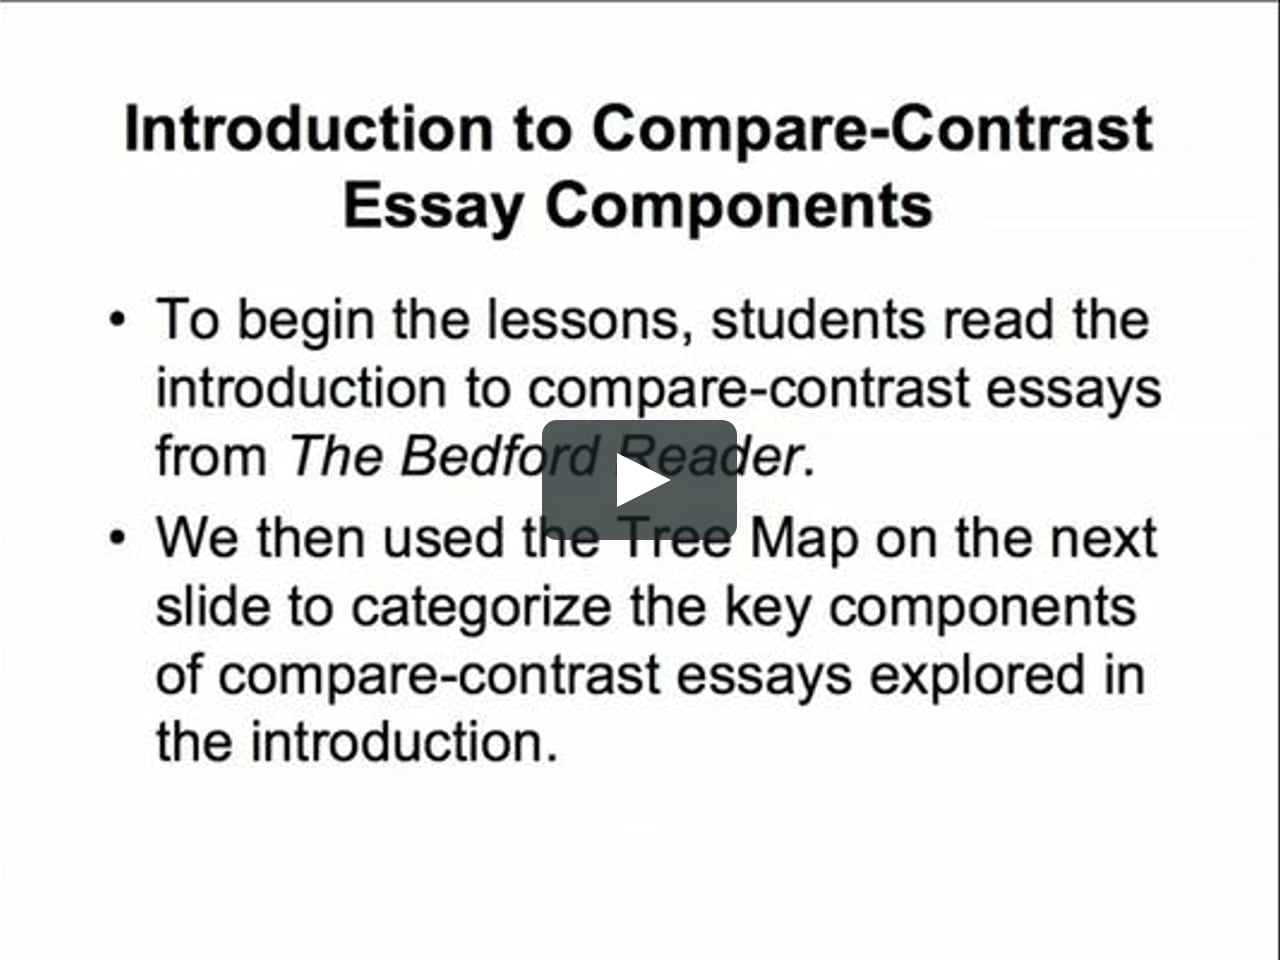 using-thinking-maps-for-a-compare-contrast-essay-unit-on-vimeo